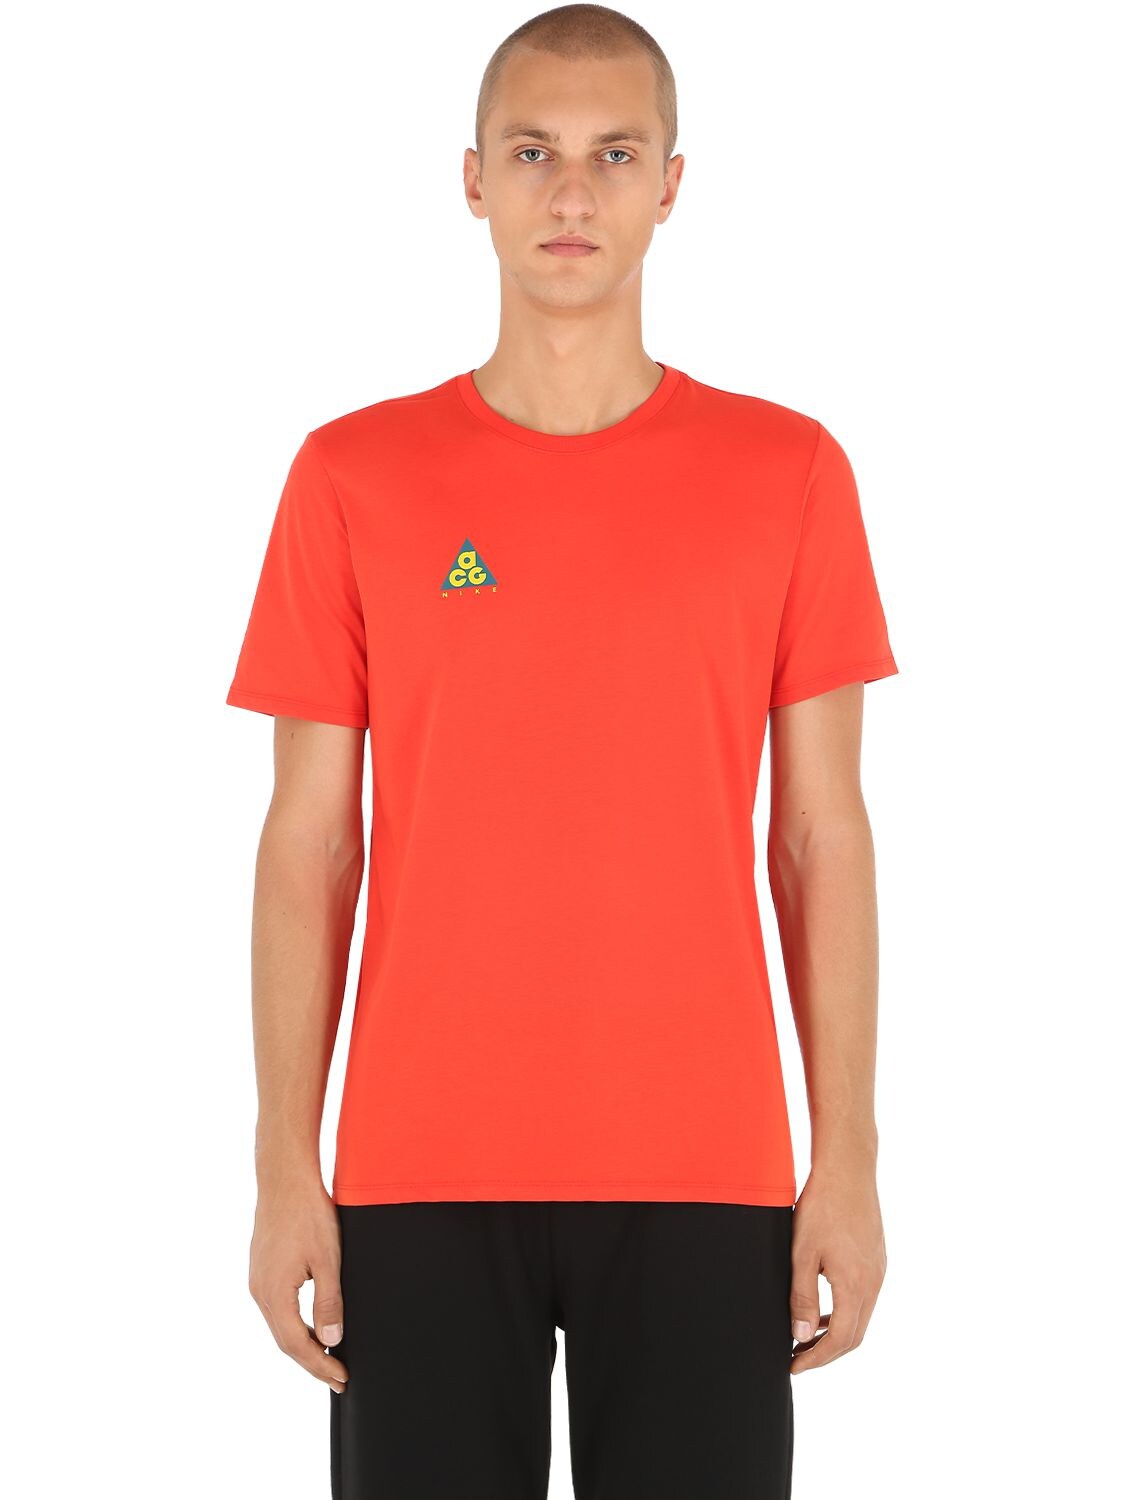 Nike Acg We Out There Jersey T-Shirt 